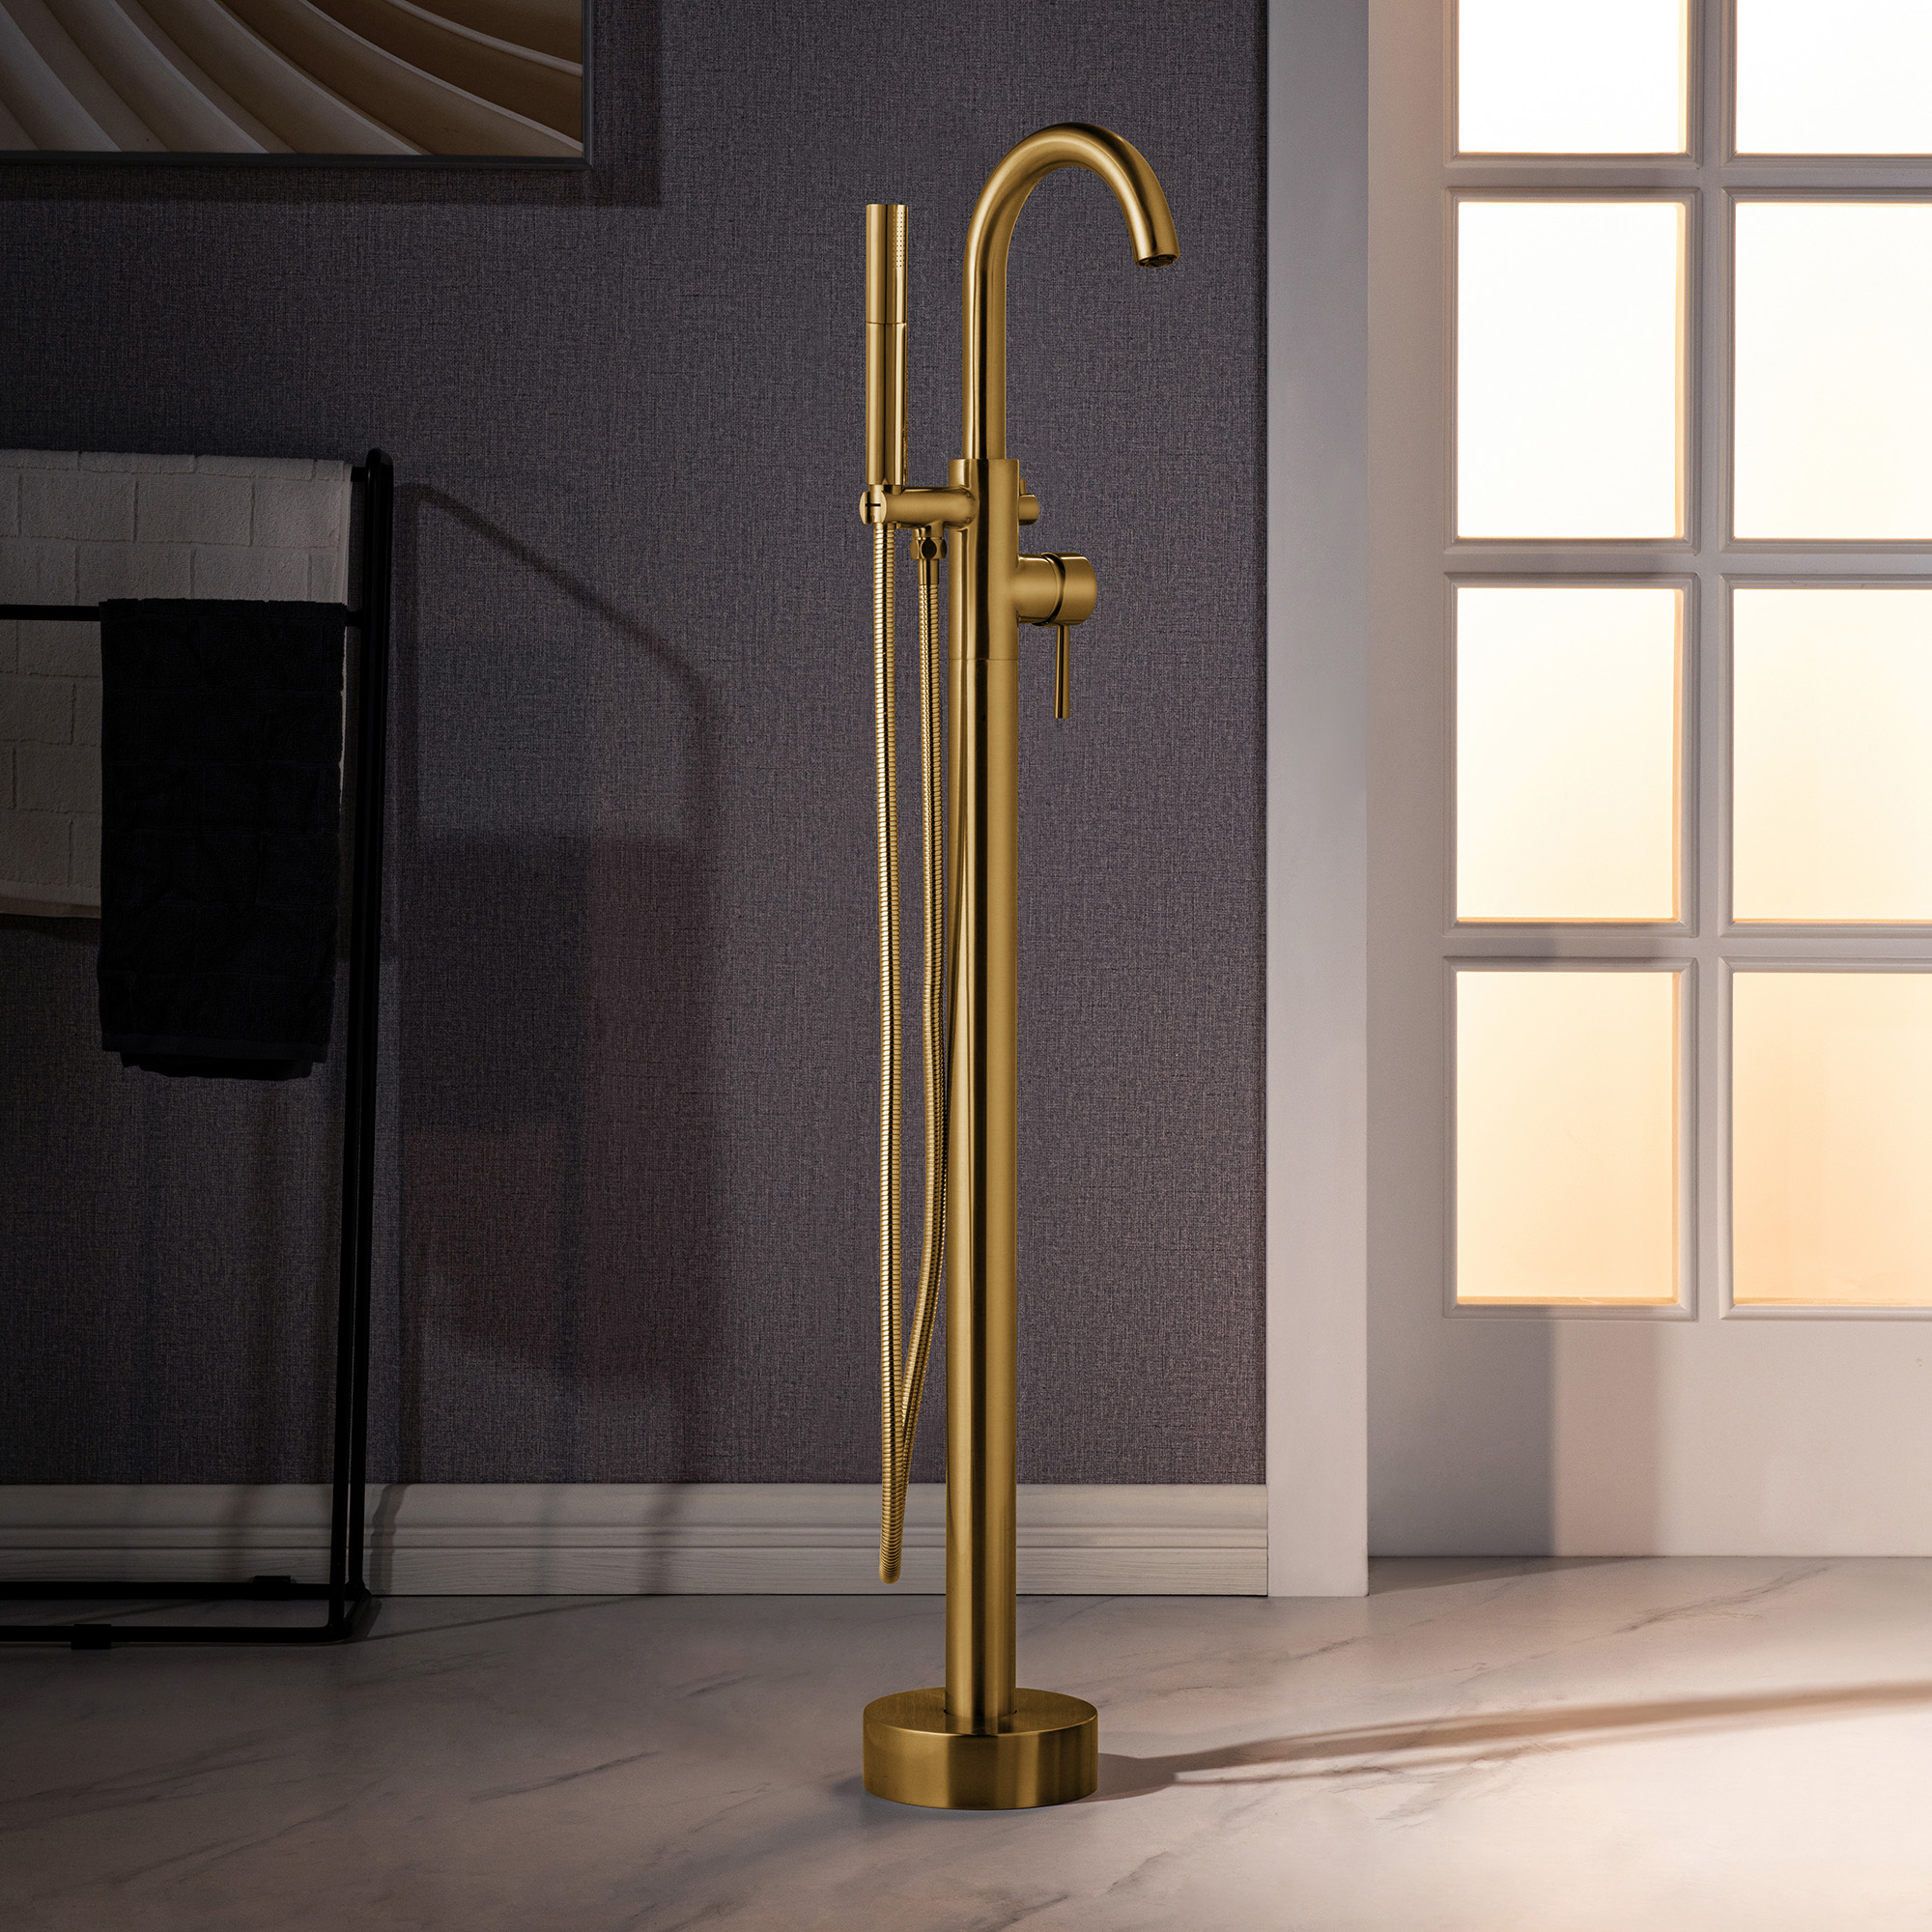 WOODBRIDGE F0026BGDR Contemporary Single Handle Floor Mount Freestanding Tub Filler Faucet with 2 Function Cylinder Style Hand Shower in Brushed Gold Finish.